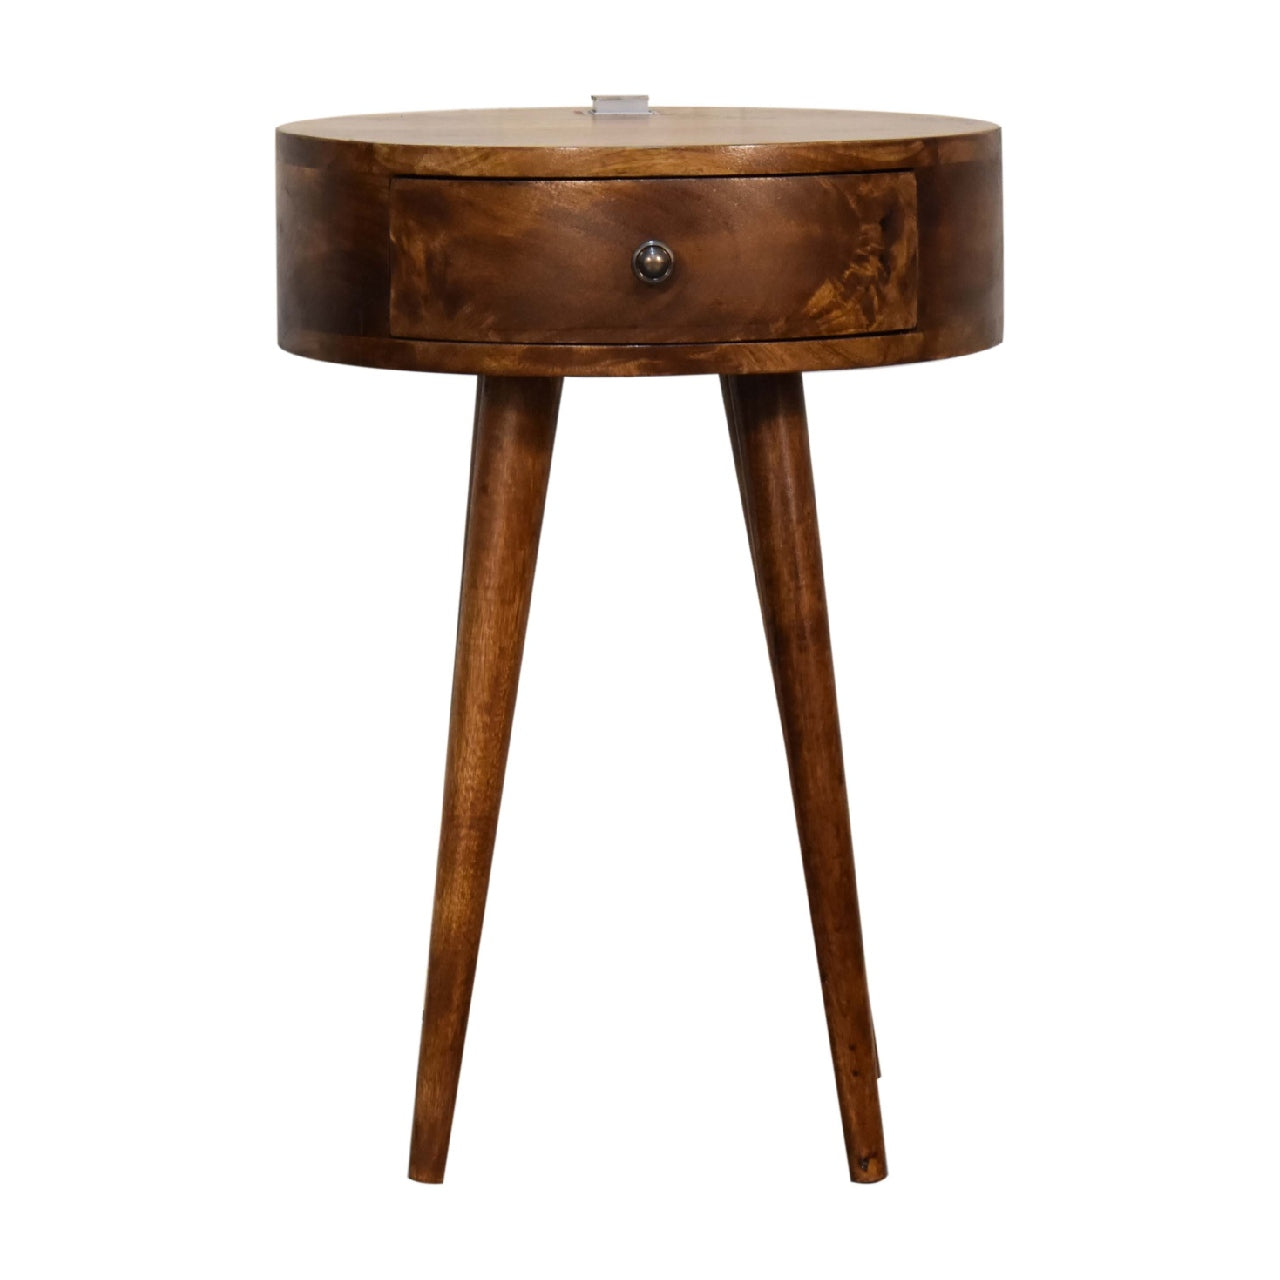 View Single Chestnut Rounded Bedside Table with Reading Light information